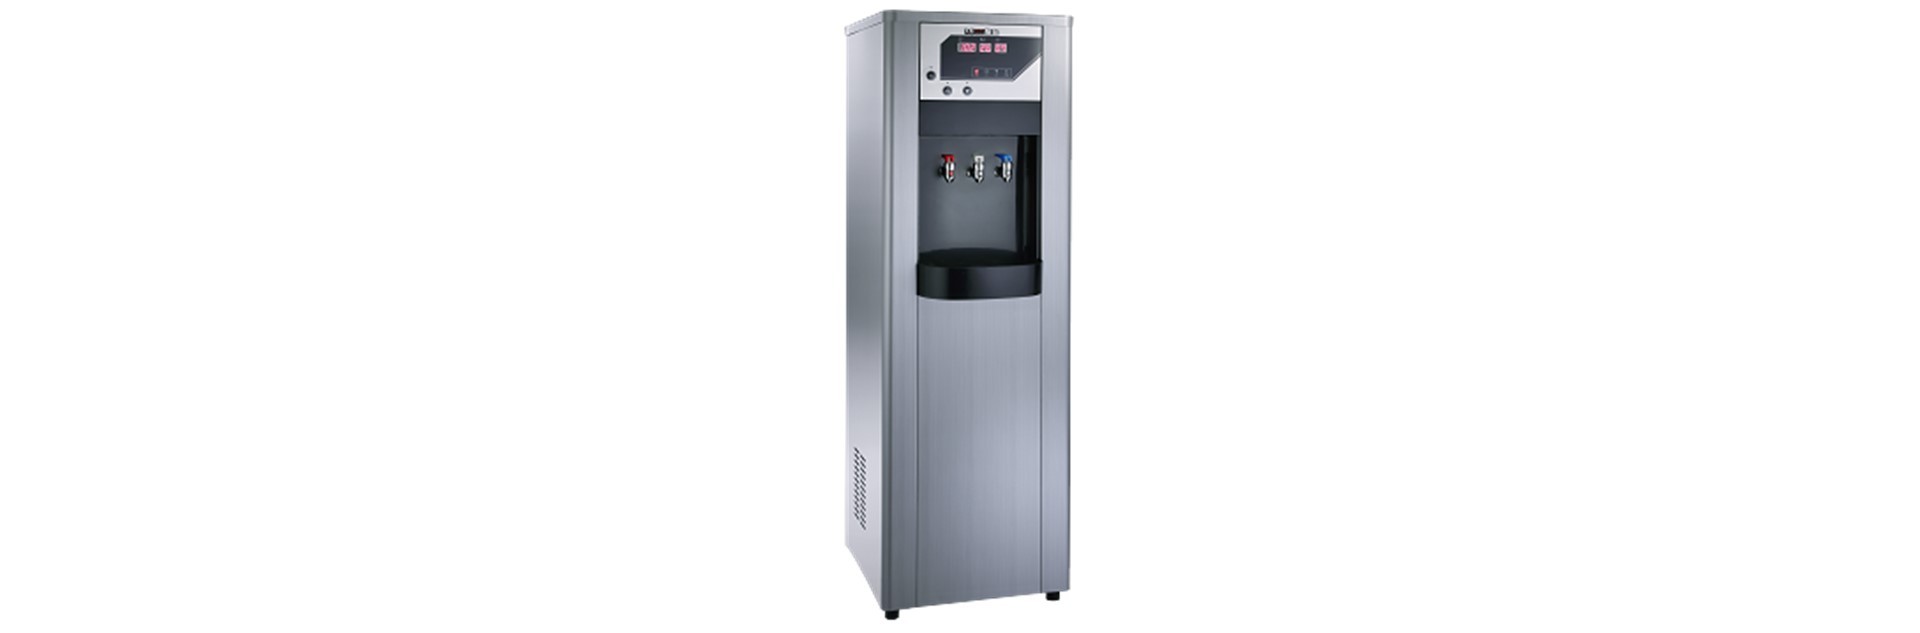 LC-91076 SeriesMicrocomputer Controlled Water Dispenser